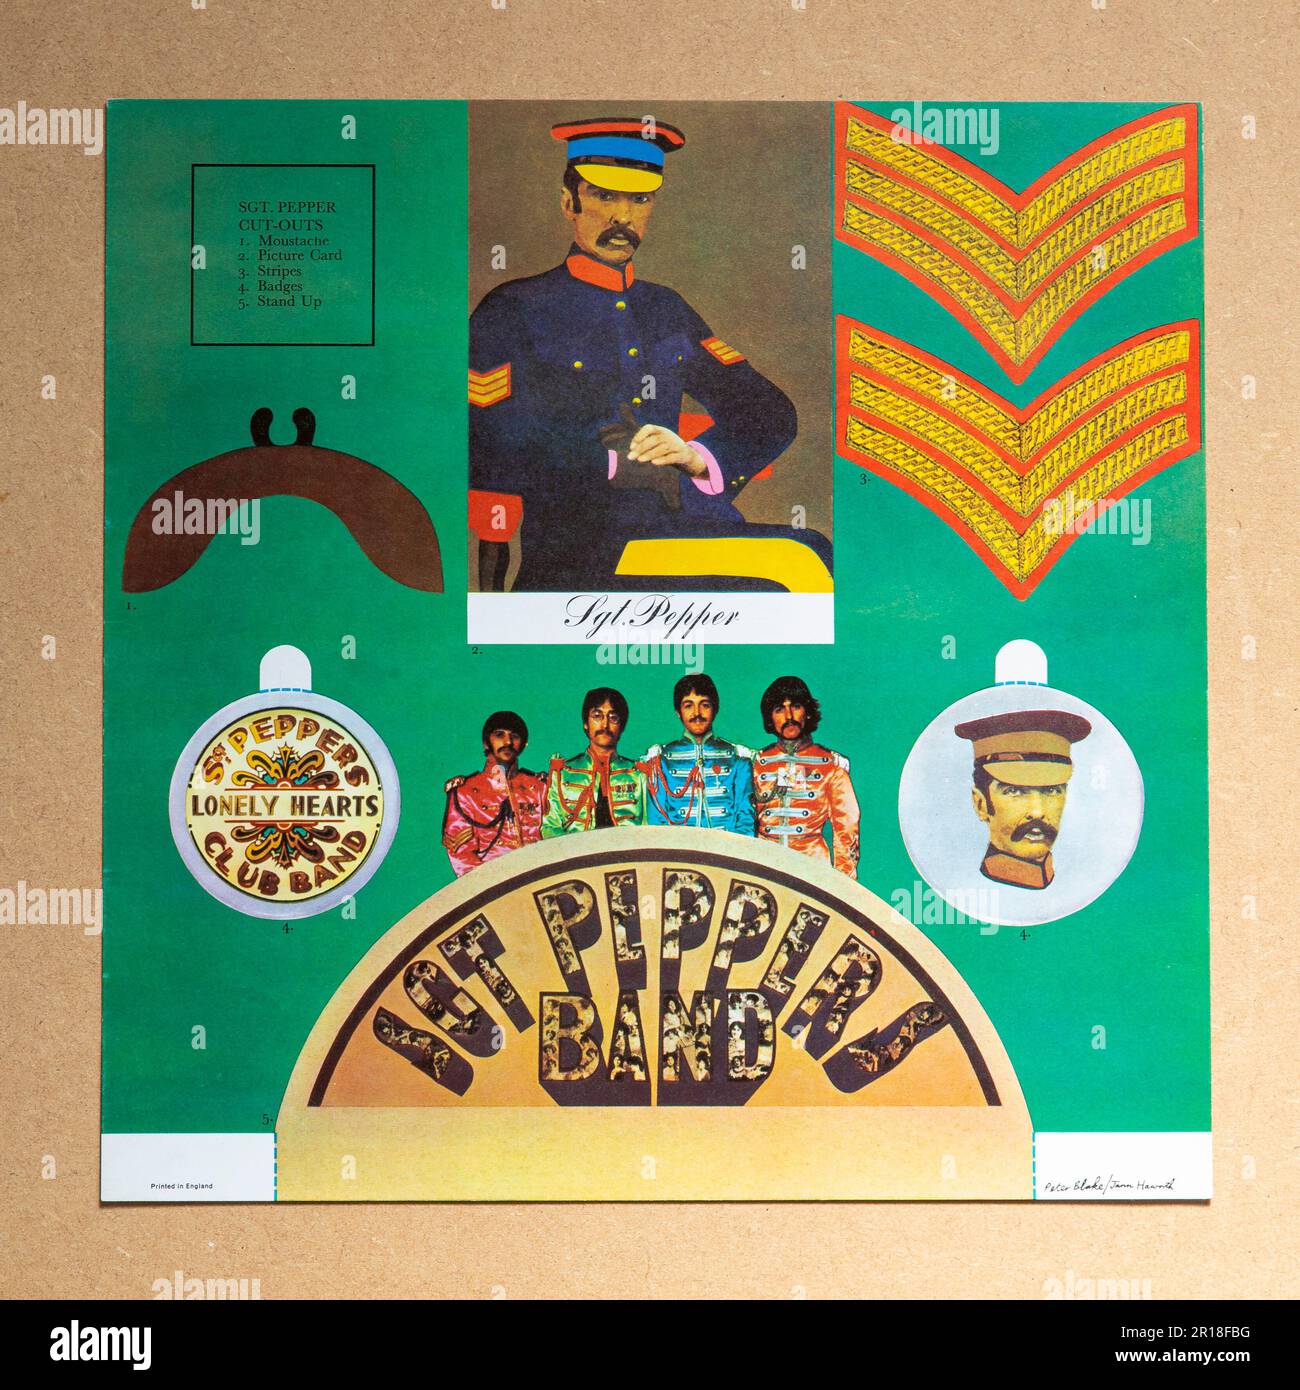 Sgt. Pepper's Lonely Hearts Club Band by The Beatles, Original Vinyl LP Album with Cut Outs Insert © Clarissa Debenham (Film Free Photography) / Alamy Stock Photo